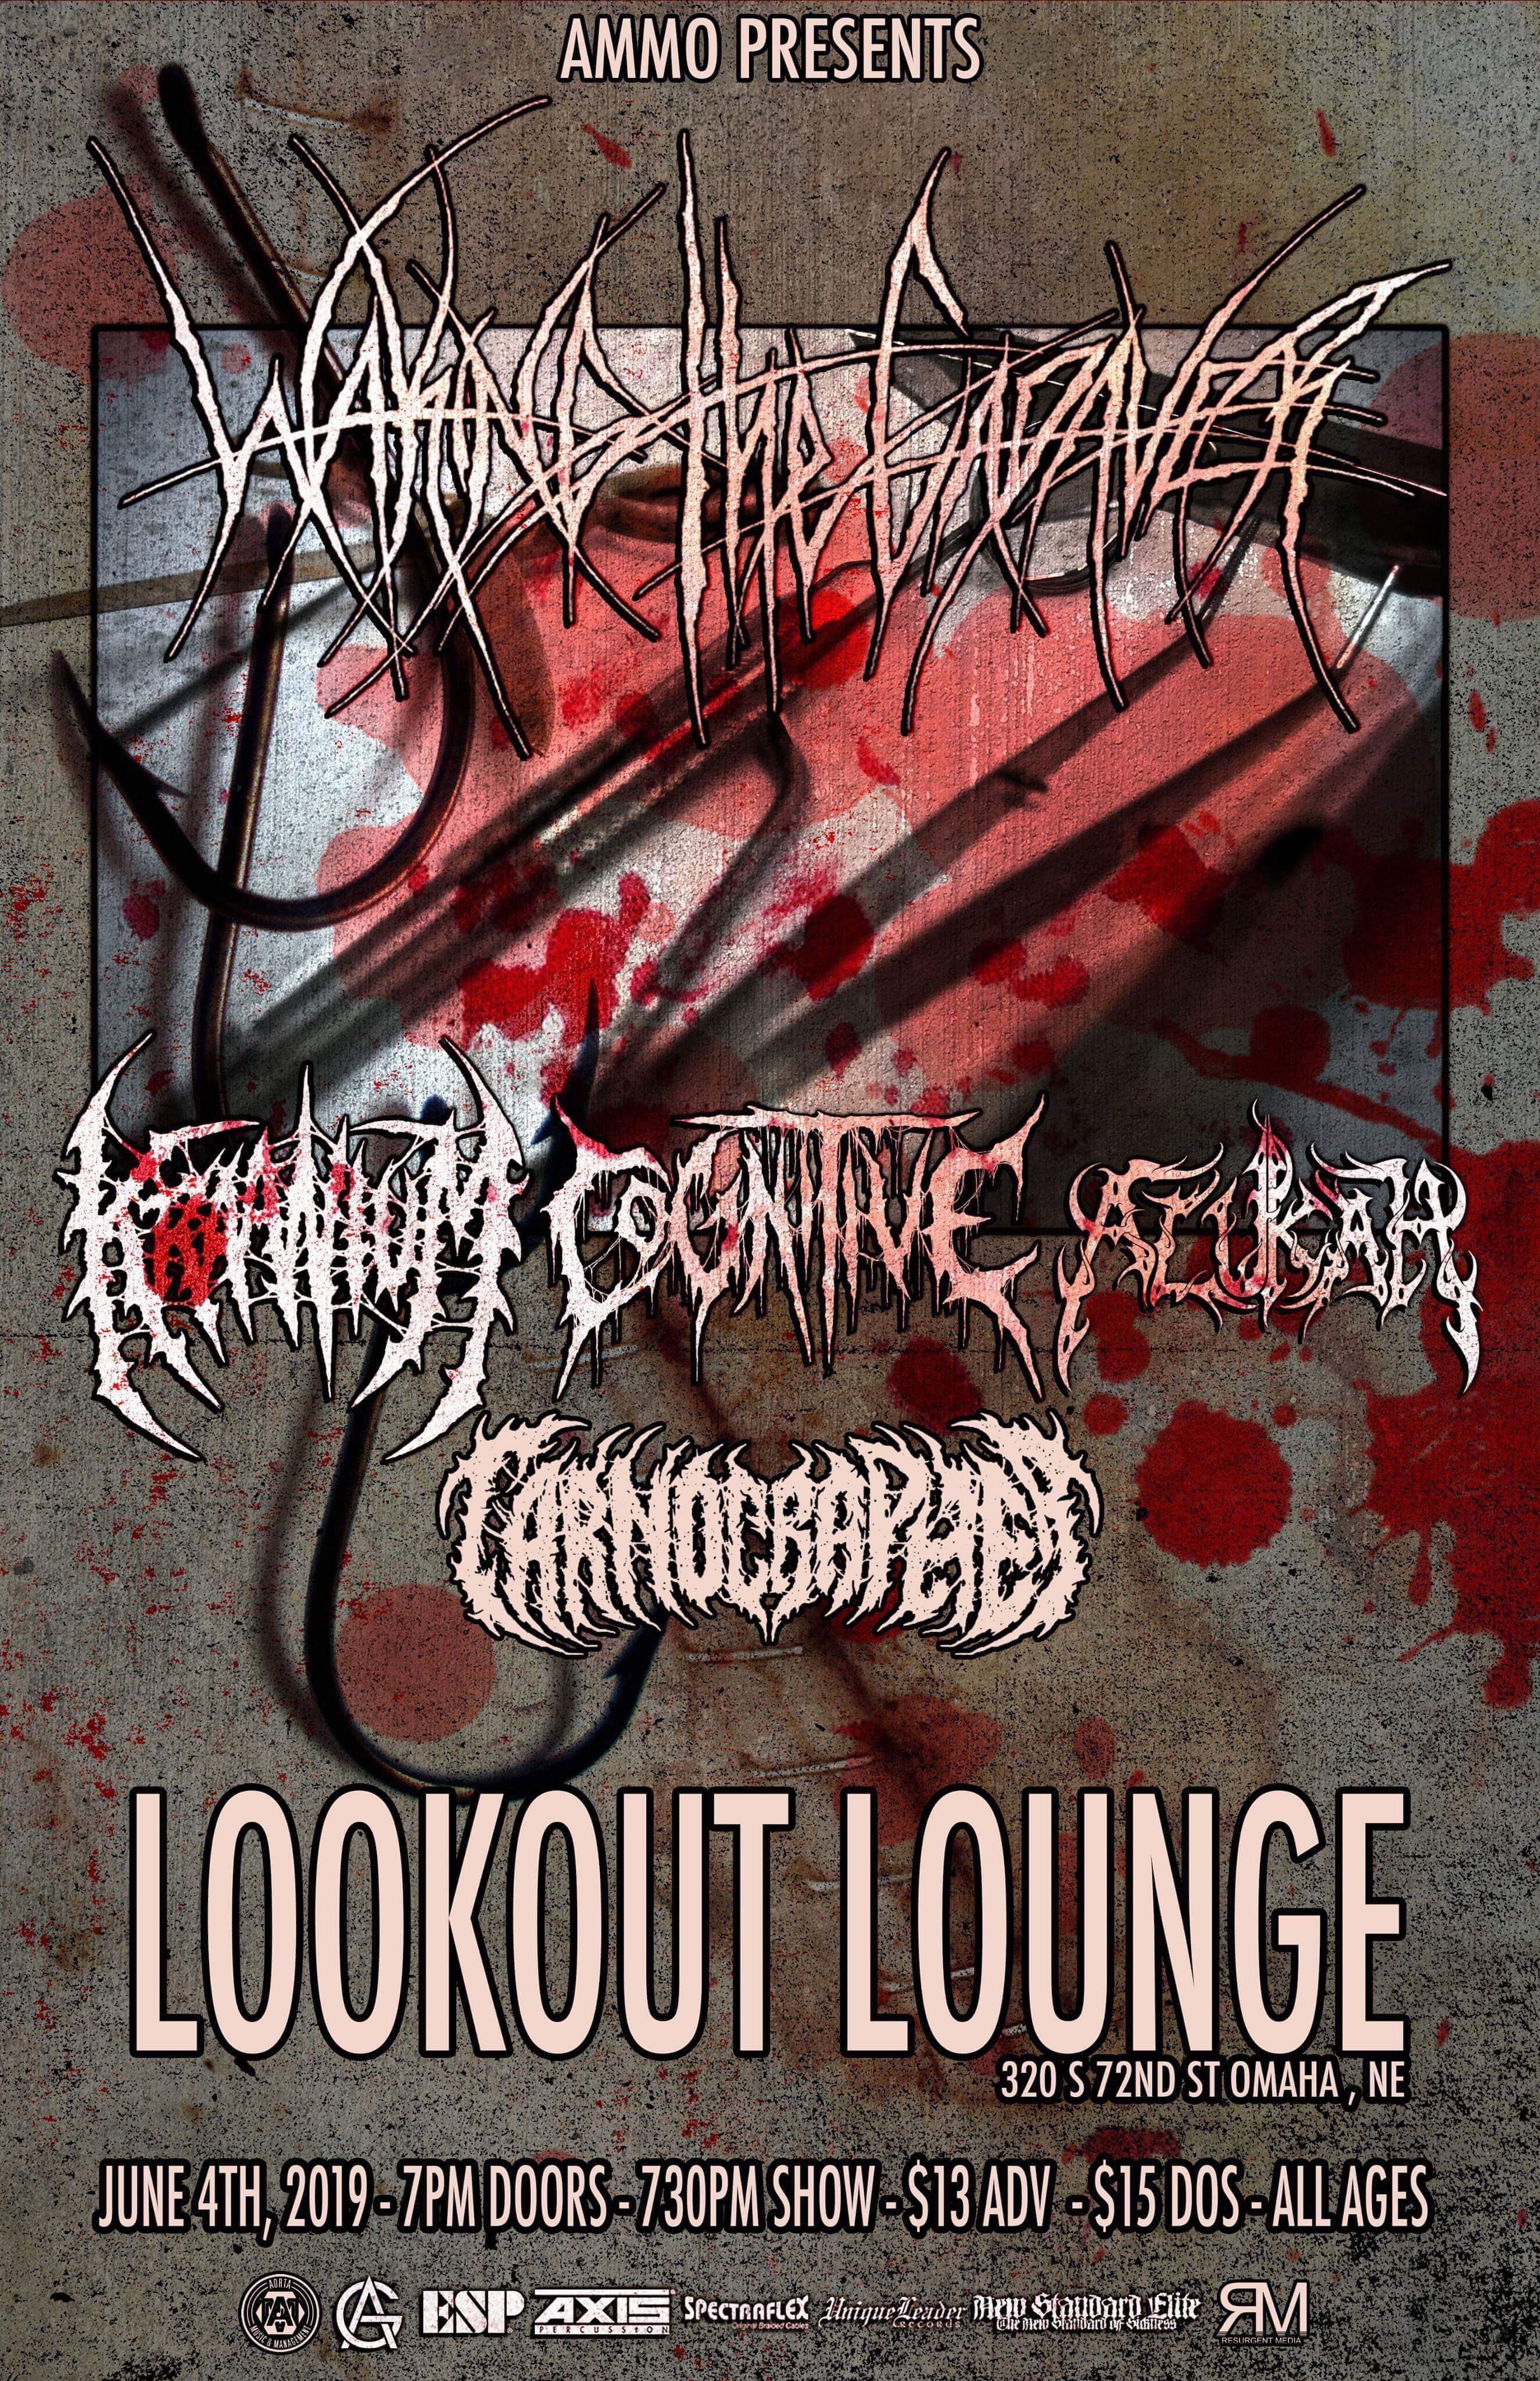 Waking The Cadaver, Kraanium, Cognitive, Alukah, Carnographer, The Lookout Lounge, Aorta Music & Management Omaha